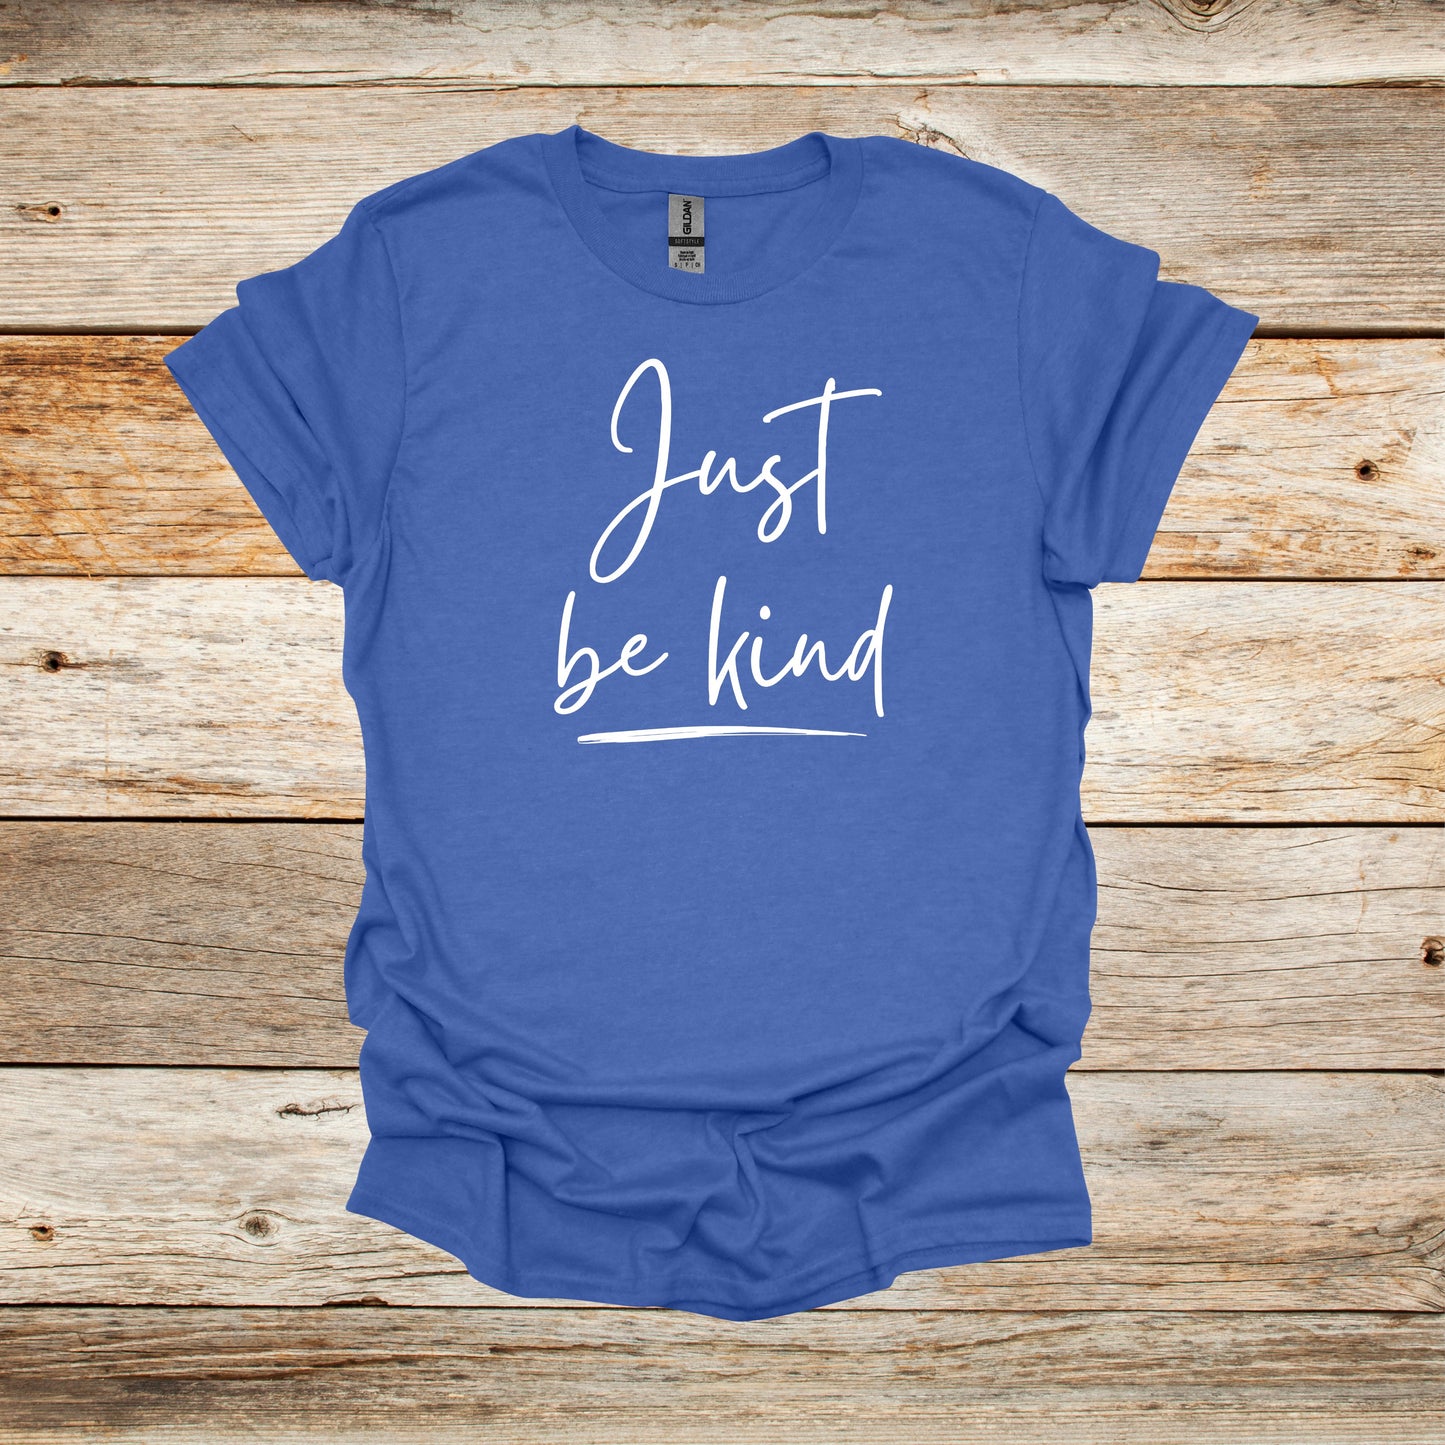 Sayings T-Shirt - Just Be Kind - Men's and Women's Tee Shirts - Sayings T-Shirts Graphic Avenue Heather Royal Adult Small 